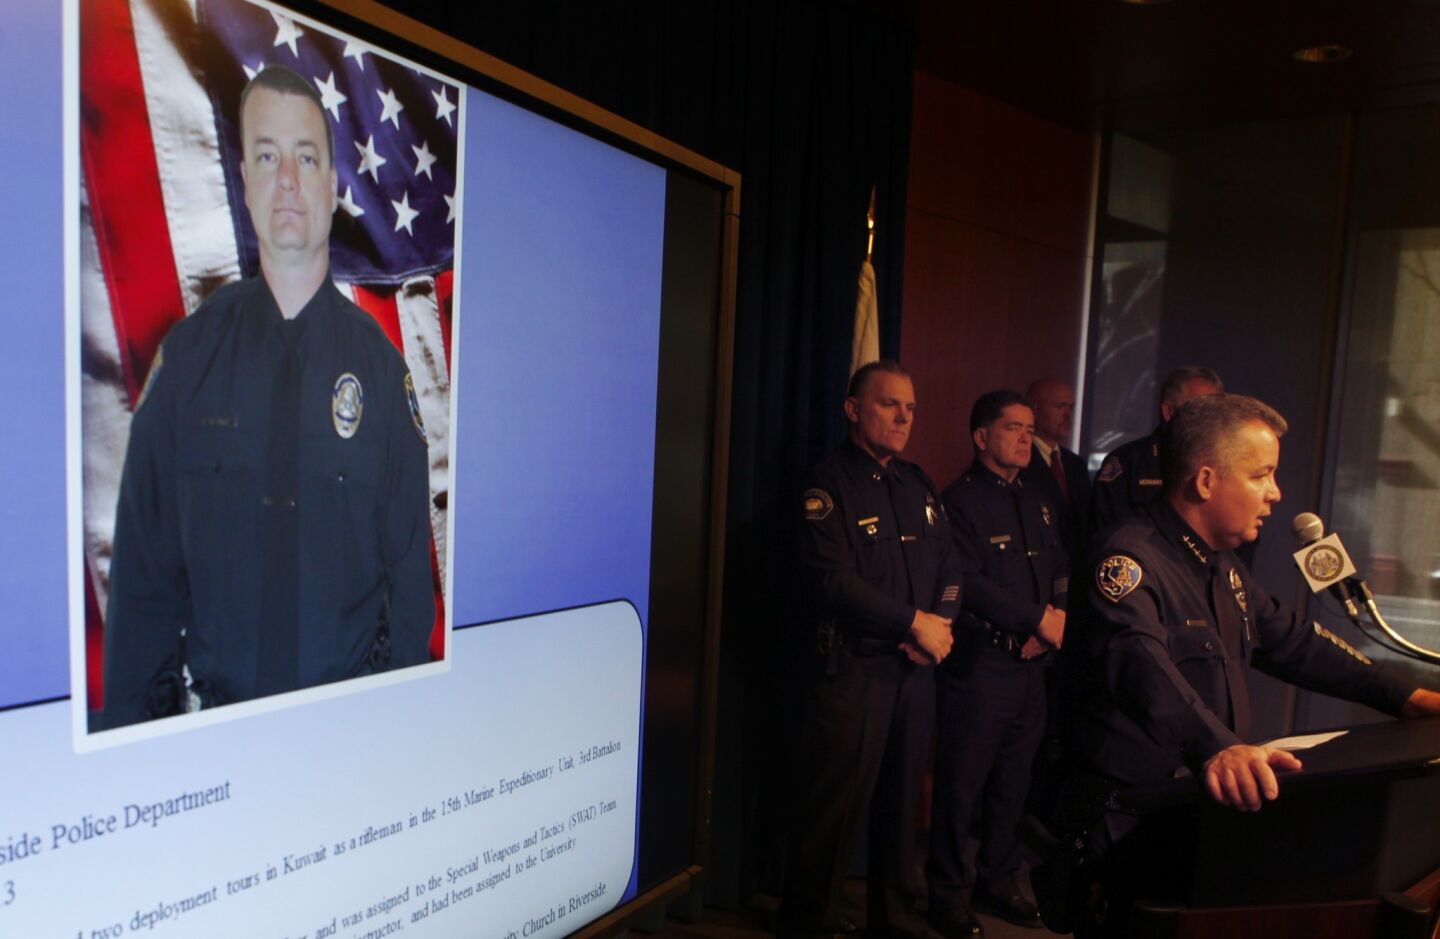 Riverside Police Chief Sergio Diaz answers questions from the media while a photo of slain Riverside Police Officer Michael Crain is projected on a screen behind him.